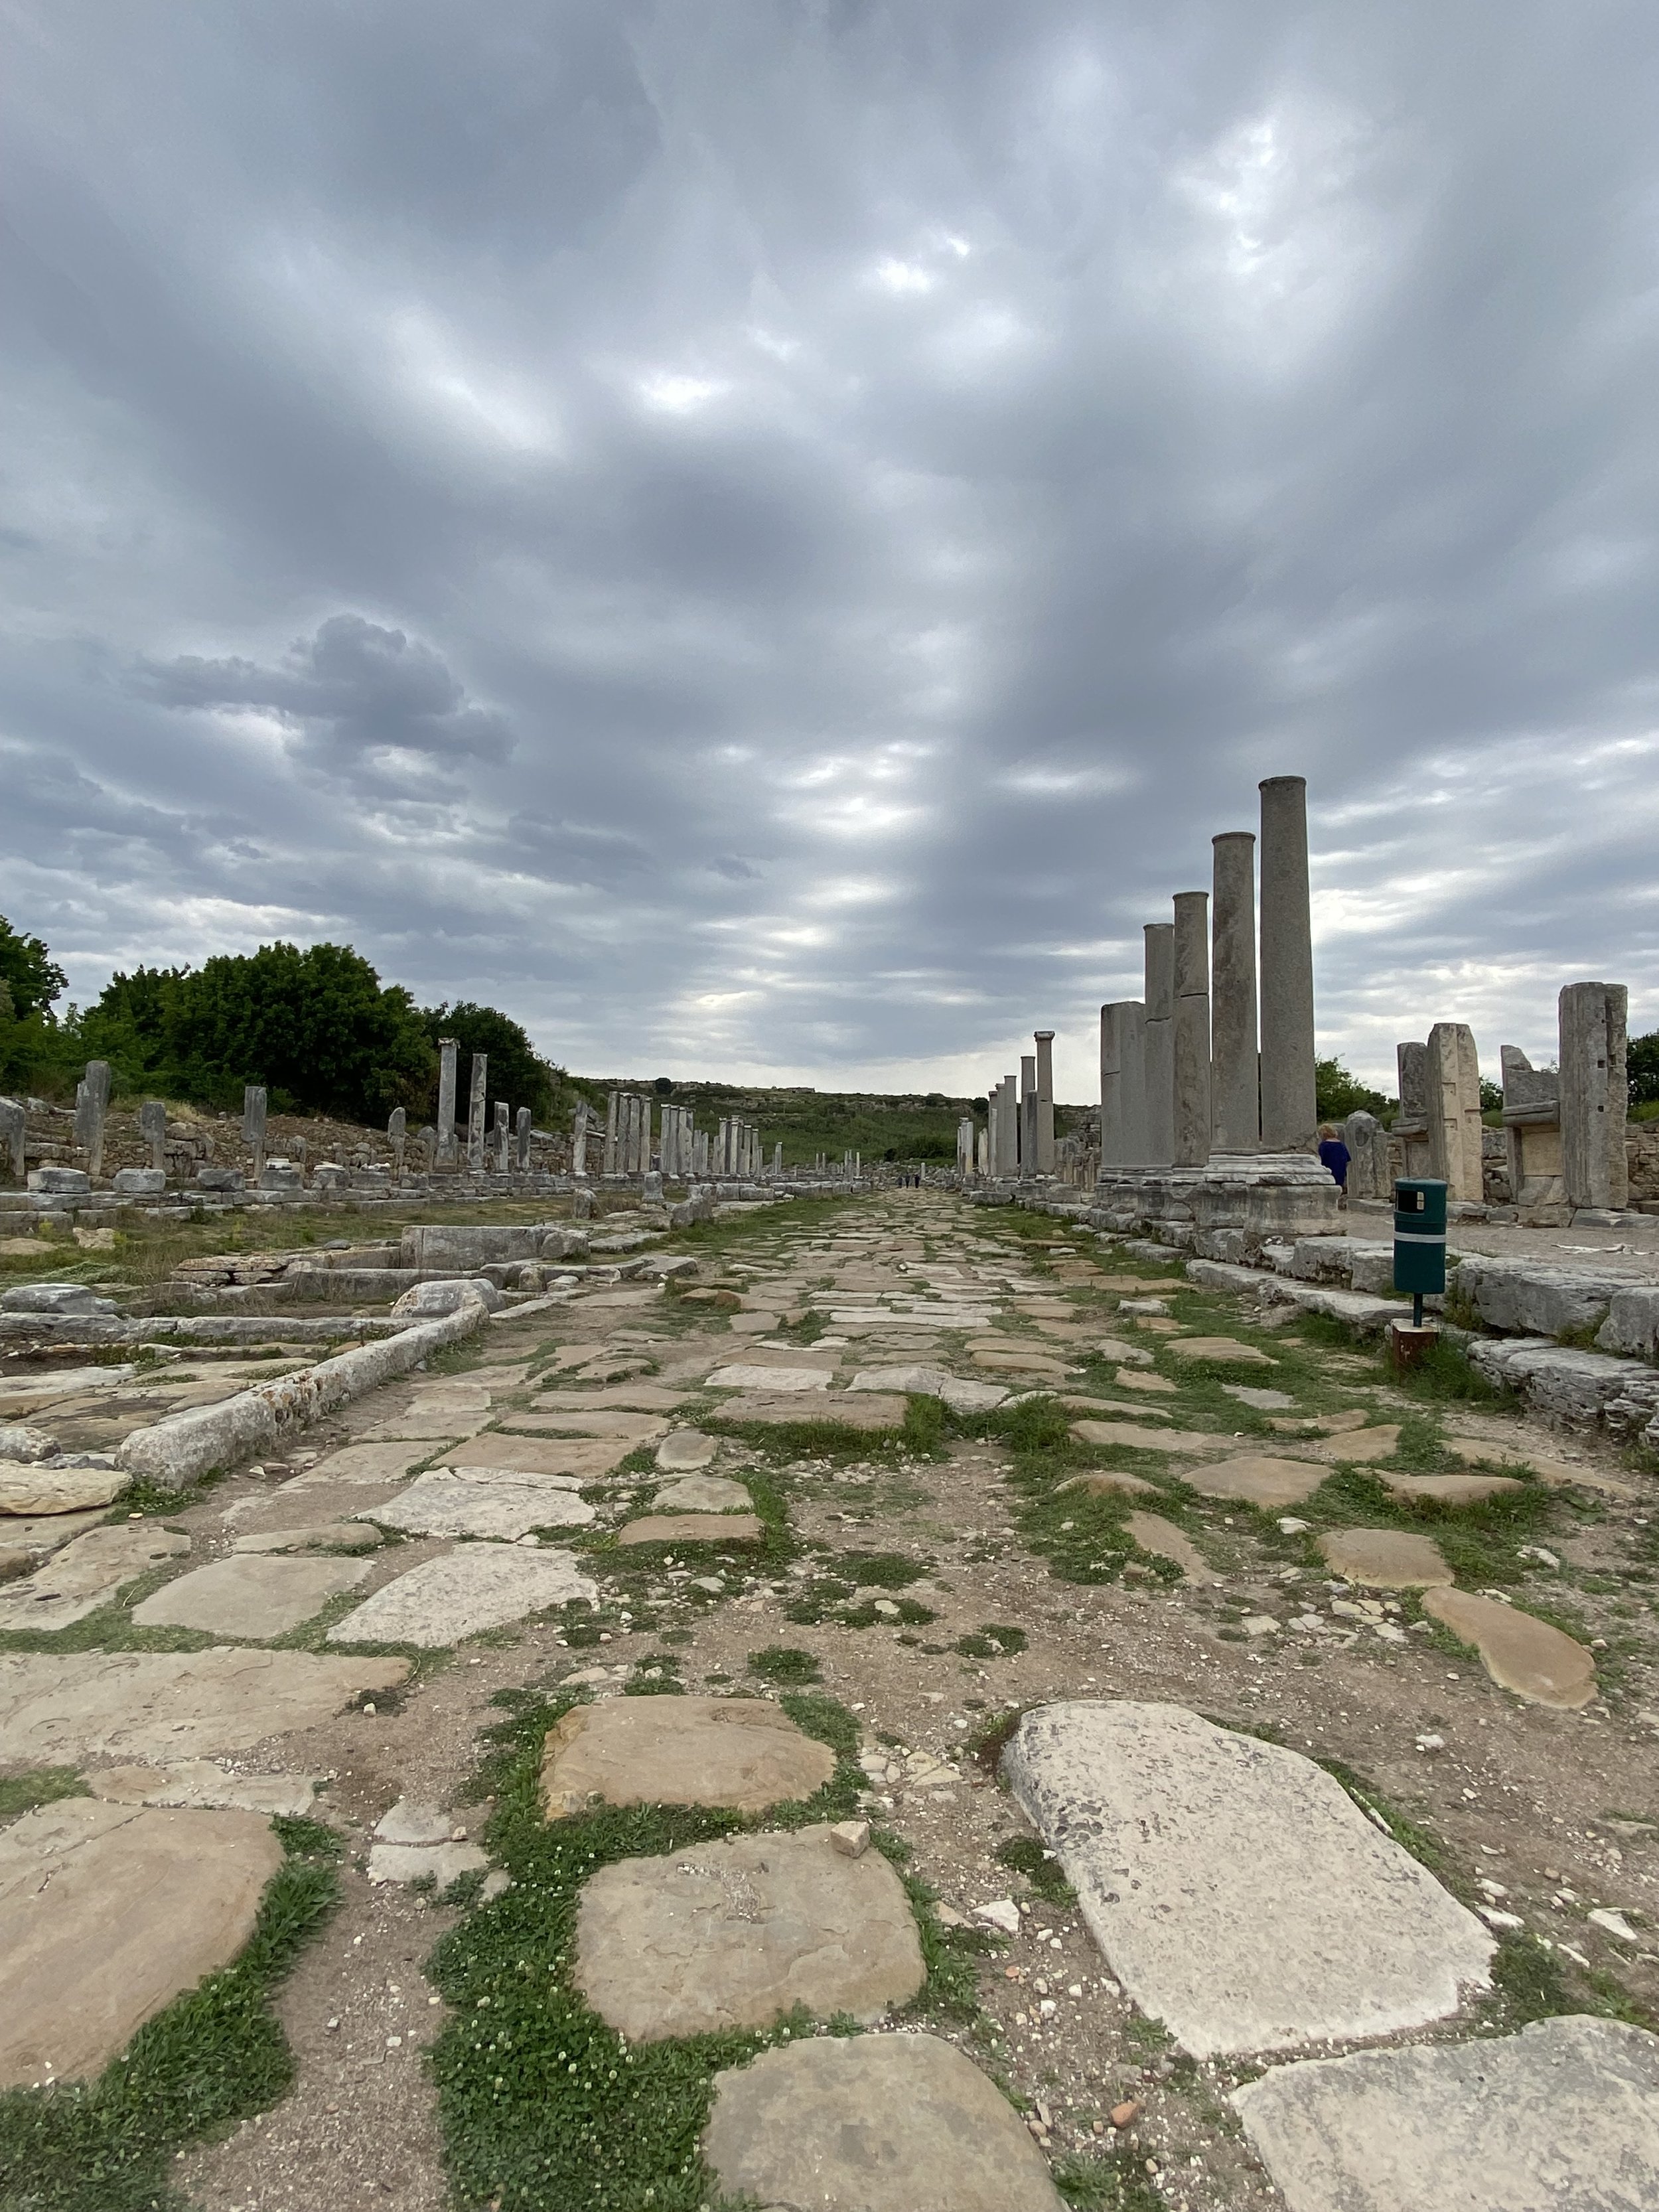 Ruins of the important city of Perga, where Paul began his first missionary journey. Along the stone roads, you can still see chariot ruts.